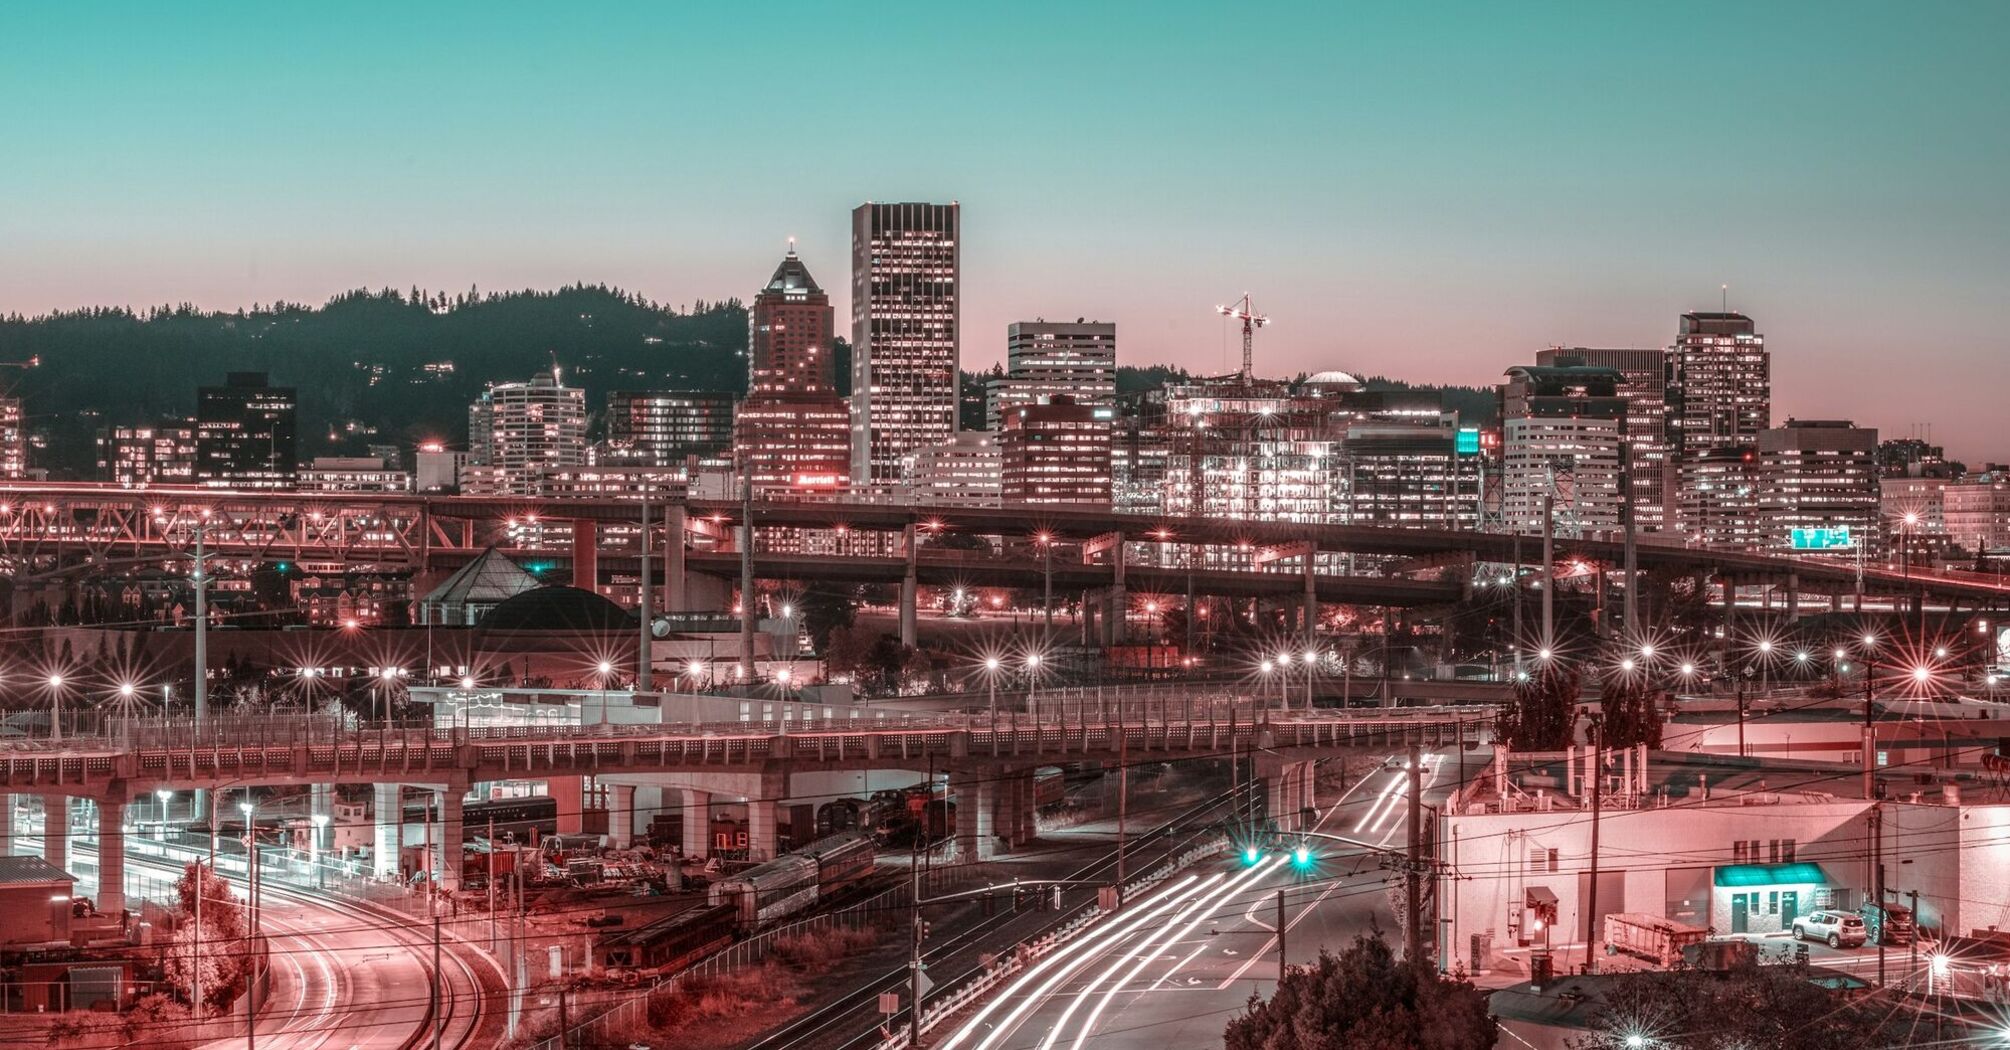 Twilight cityscape with illuminated buildings and bustling traffic trails in Portland, Oregon